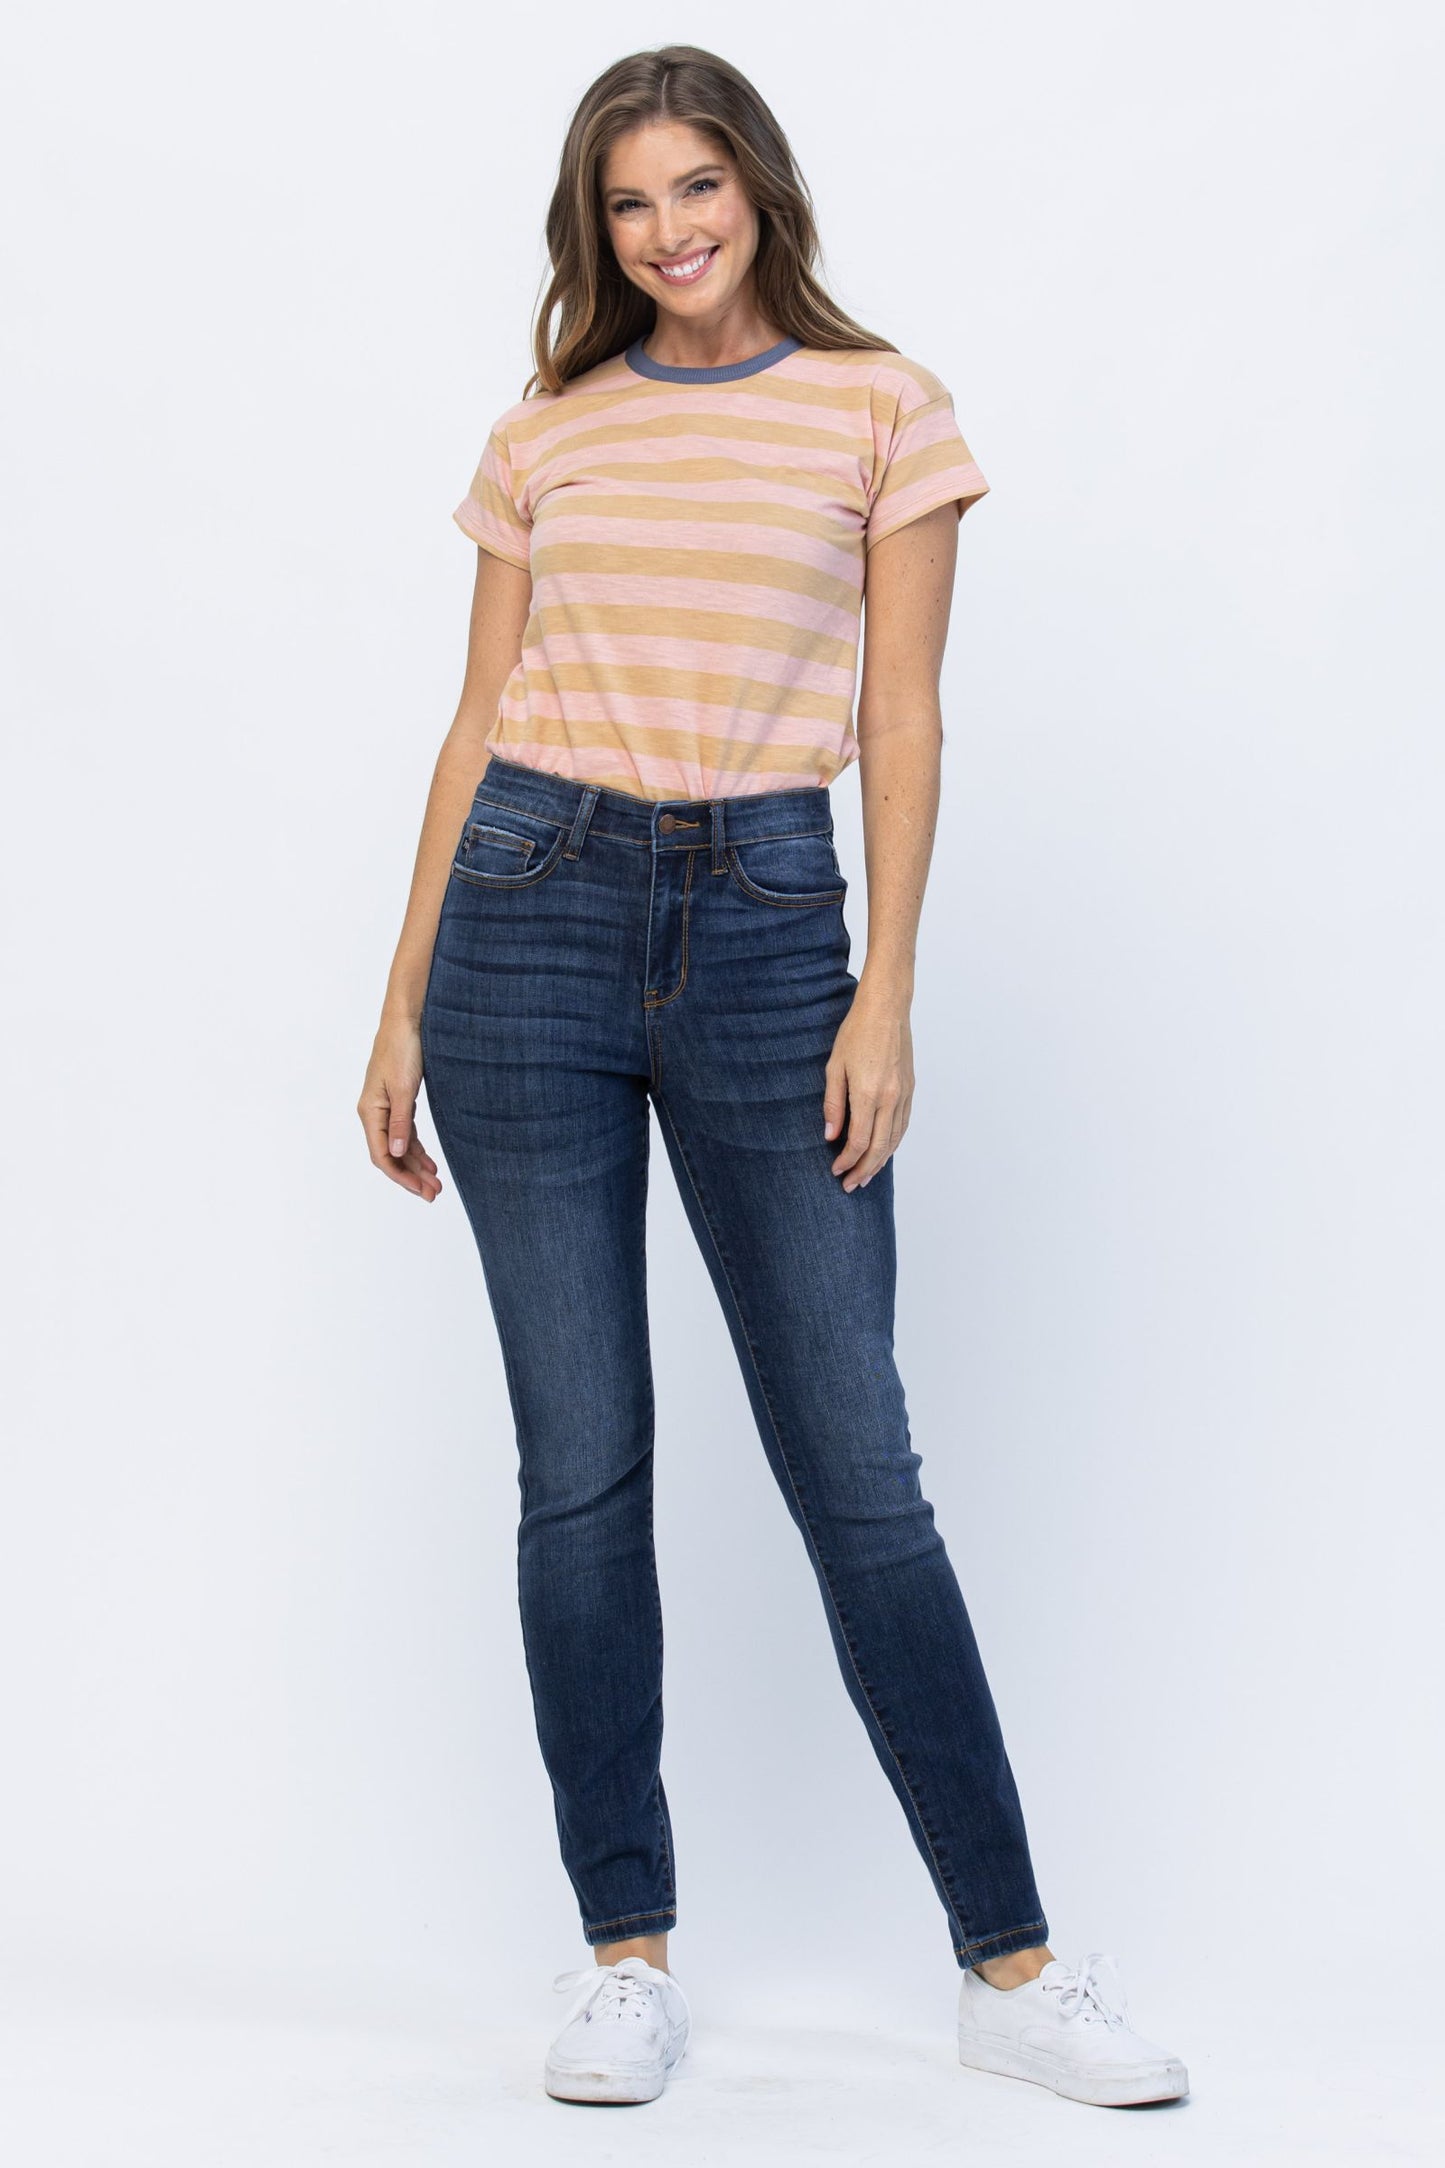 Judy Blue 82325: Larissa High-Rise/Relaxed Skinny/Dk